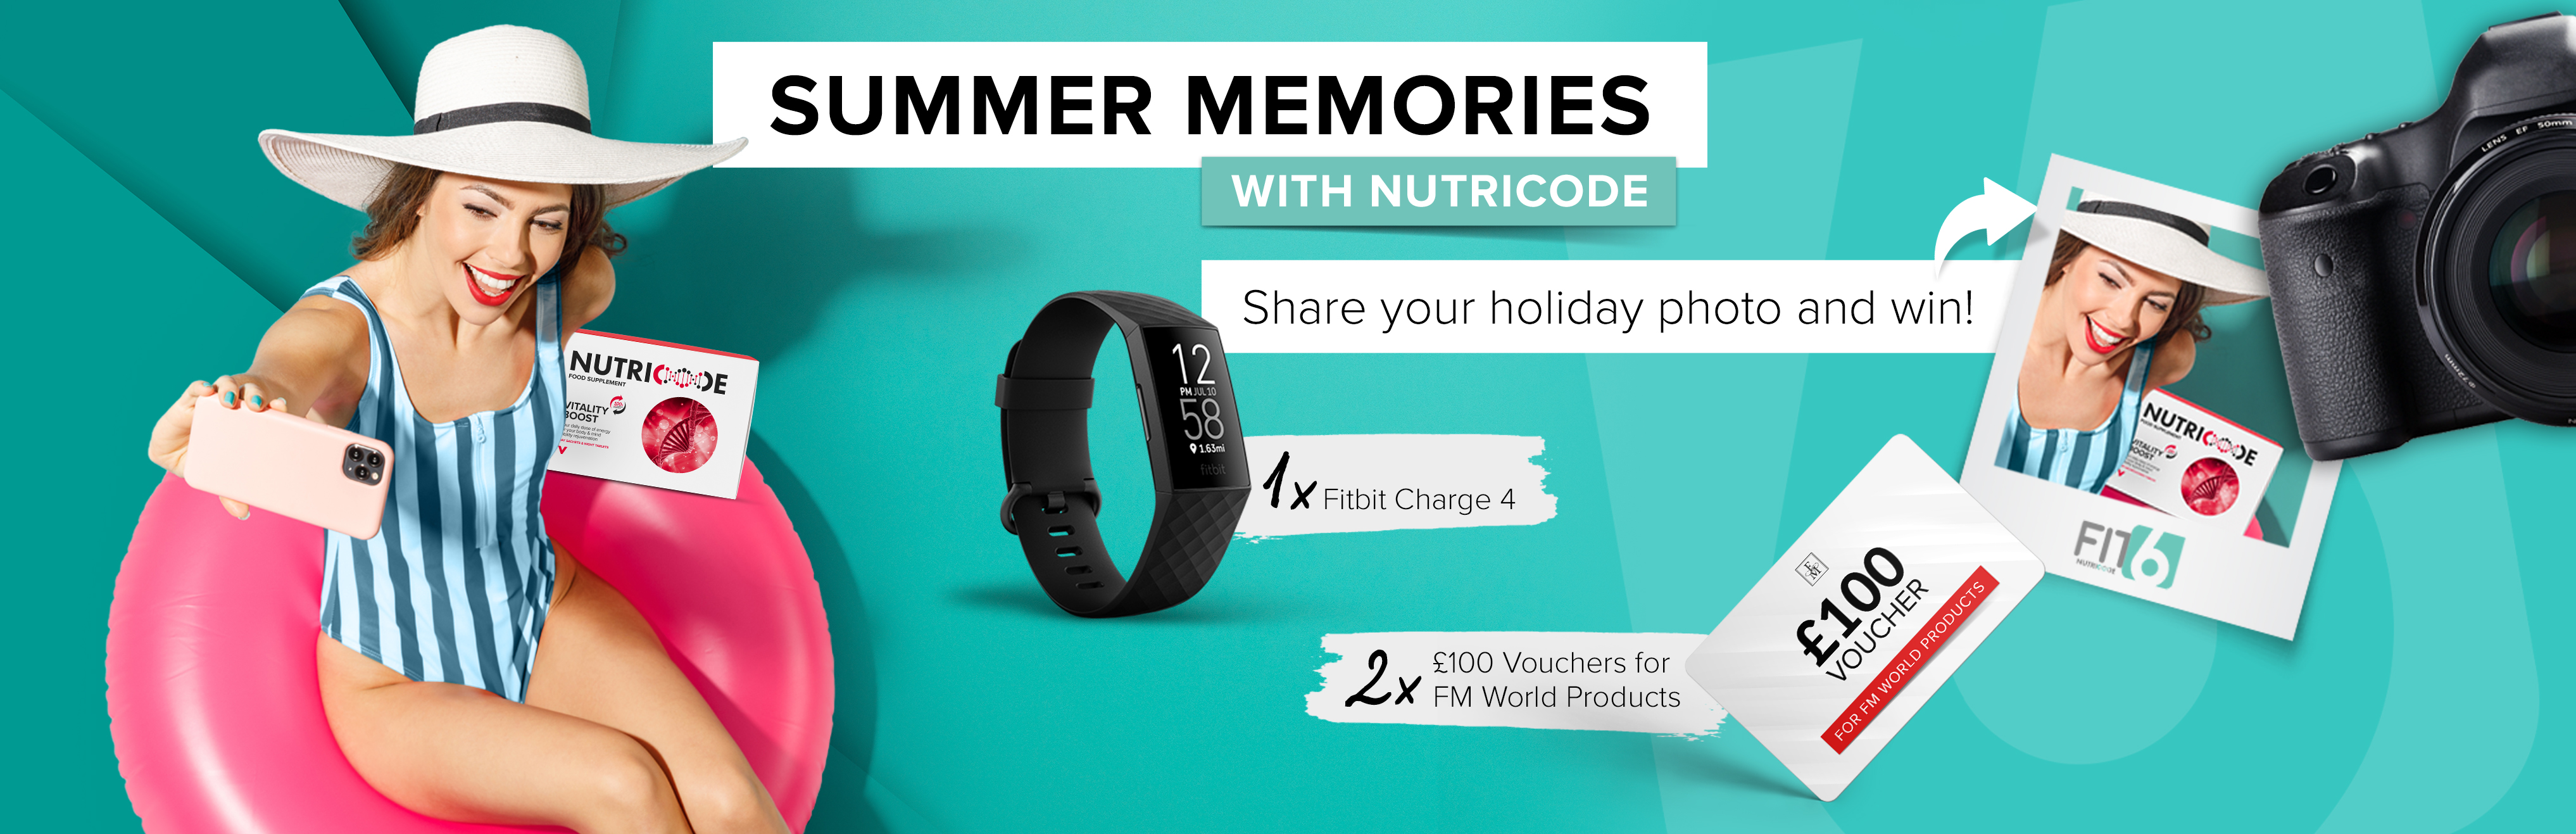 “SUMMER MEMORIES WITH NUTRICODE” photo competition